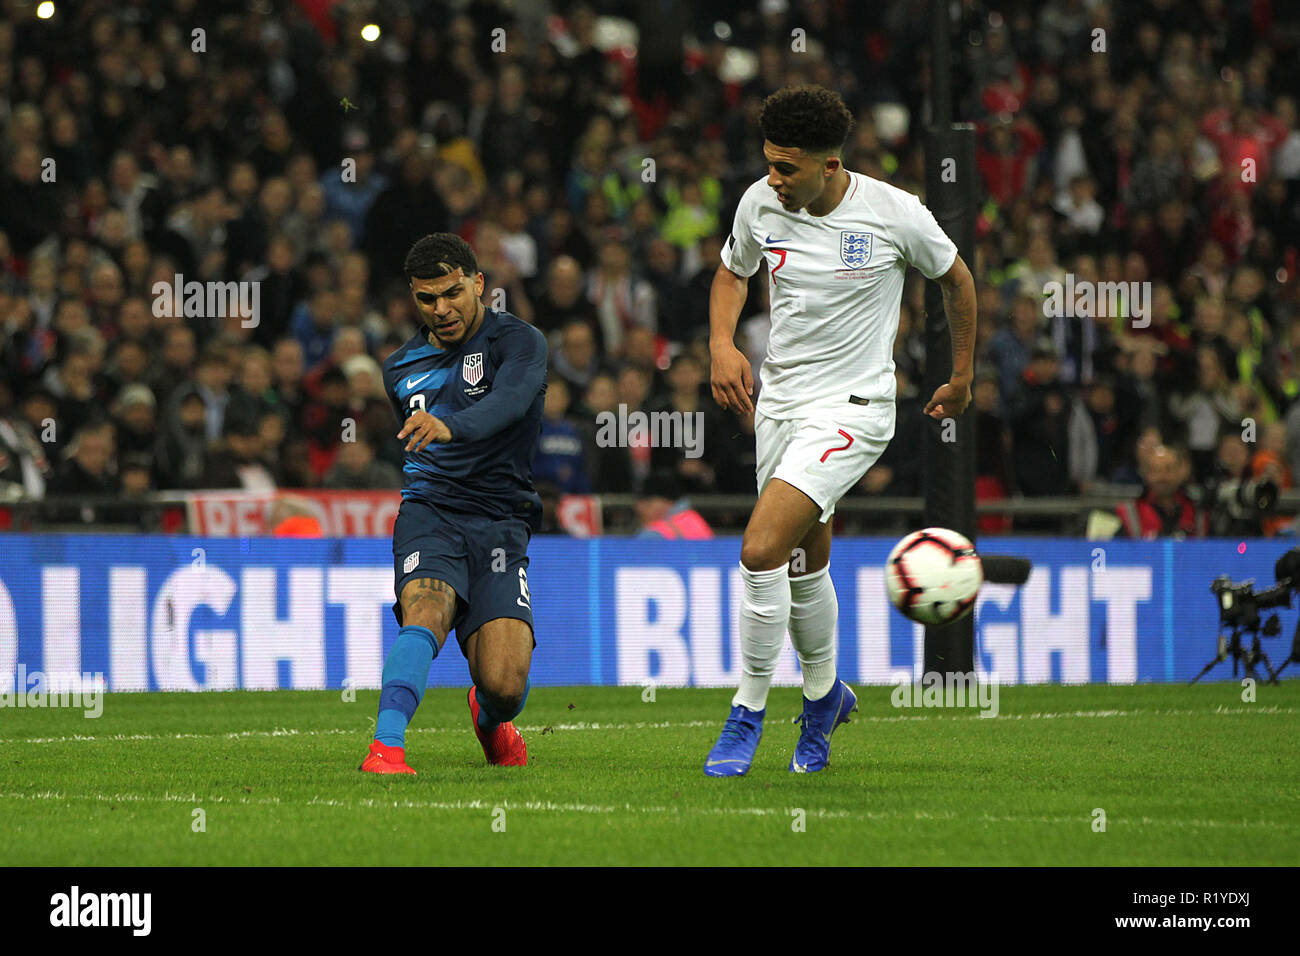 London, UK. 15th November, 2018. DeAndre Yedlin of USA clears under pressure from Jadon Sancho of England during the International Friendly match between England and USA at Wembley Stadium on November 15th 2018 in London, England. (Photo by Matt Bradshaw/phcimages) Credit: PHC Images/Alamy Live News Stock Photo